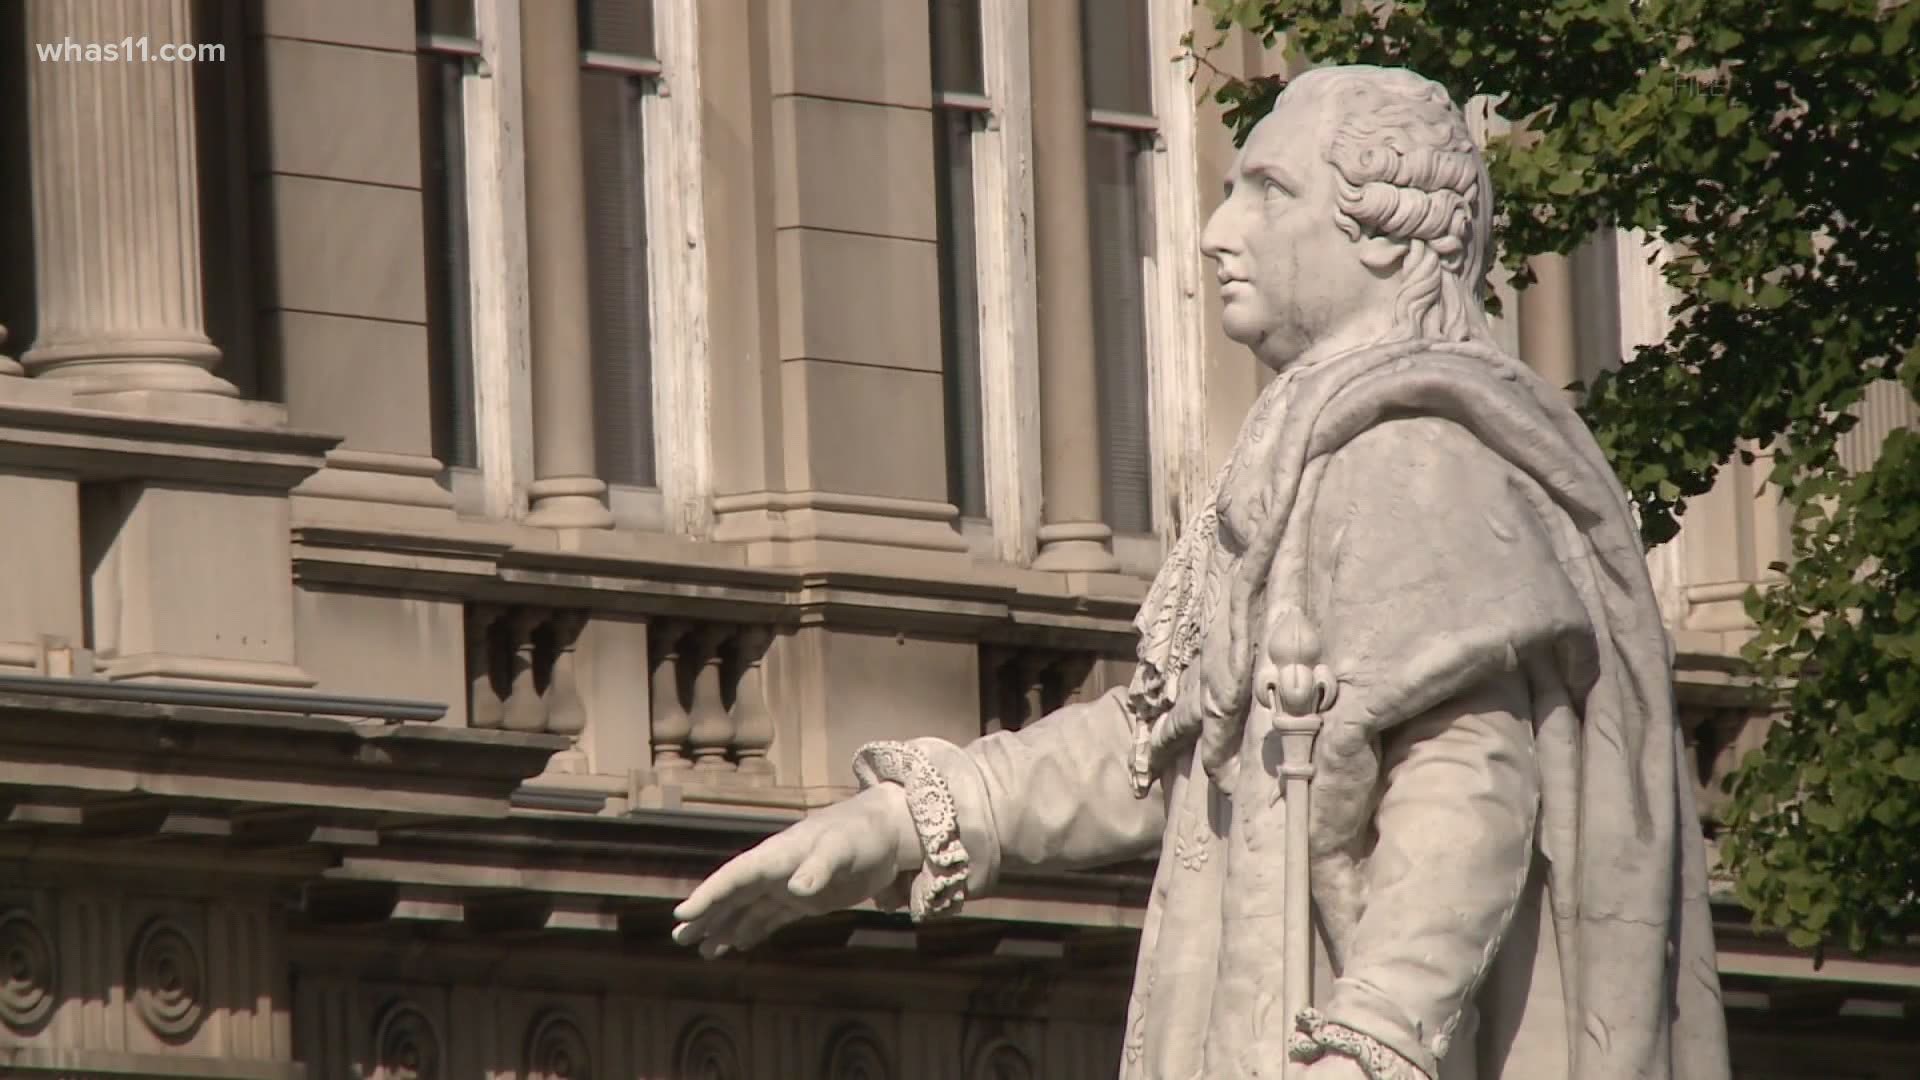 Crews removed the statue of King Louis XVI following months of protests and vandalism in Louisville.